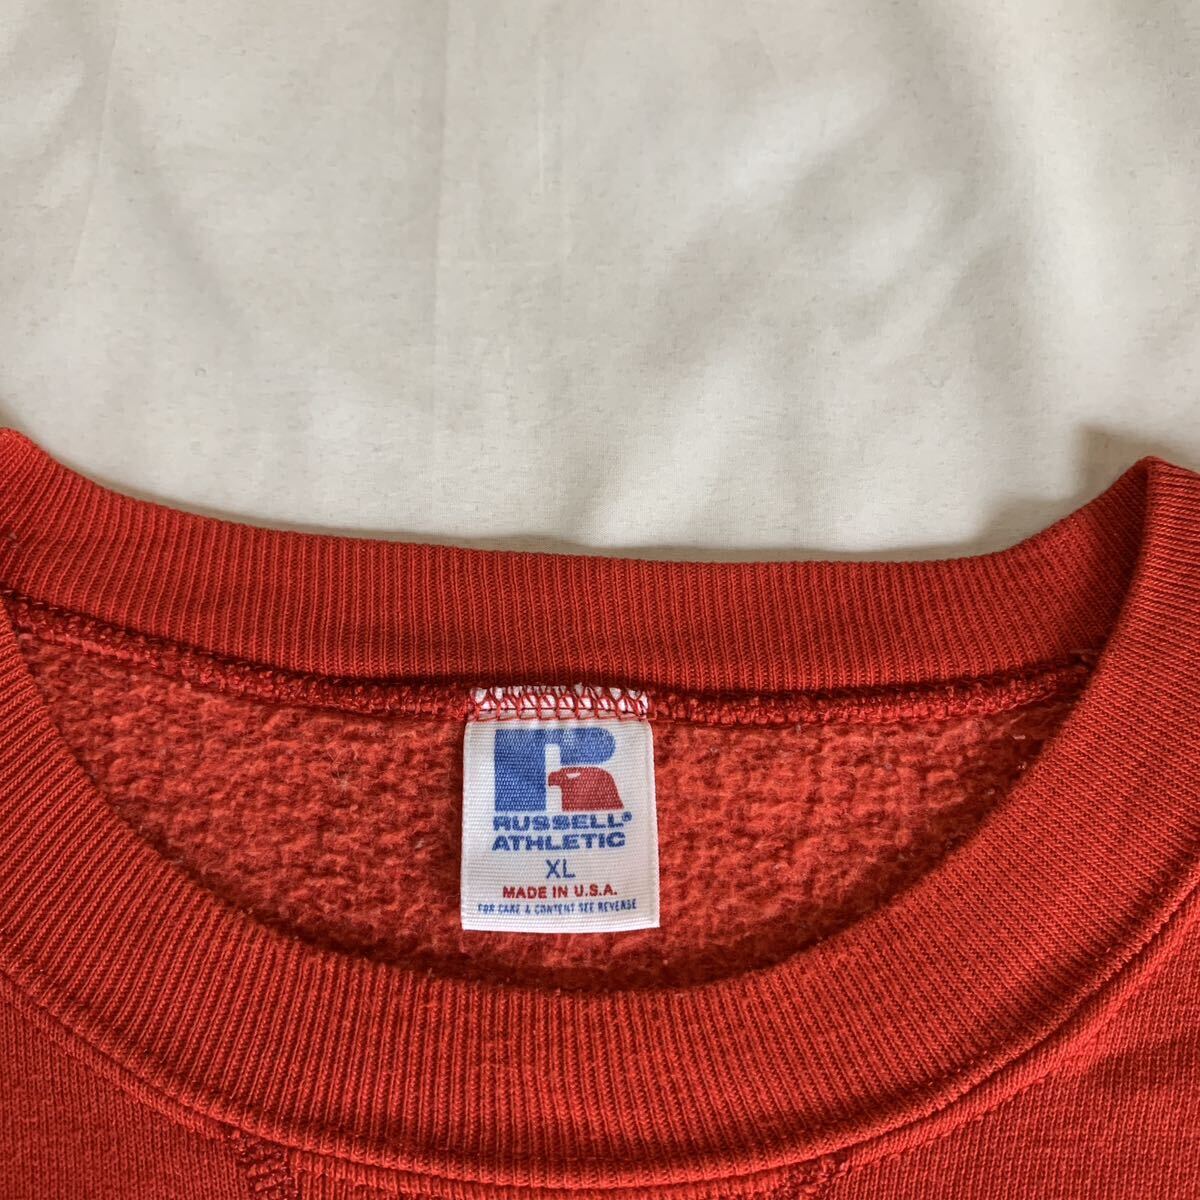 80s RUSSELL ATHLETIC PRINTED SWEAT MADE IN USA ラッセルアスレチック プリントスウェット USA製 アメカジ 70s プリントタグ アメリカ製_画像4